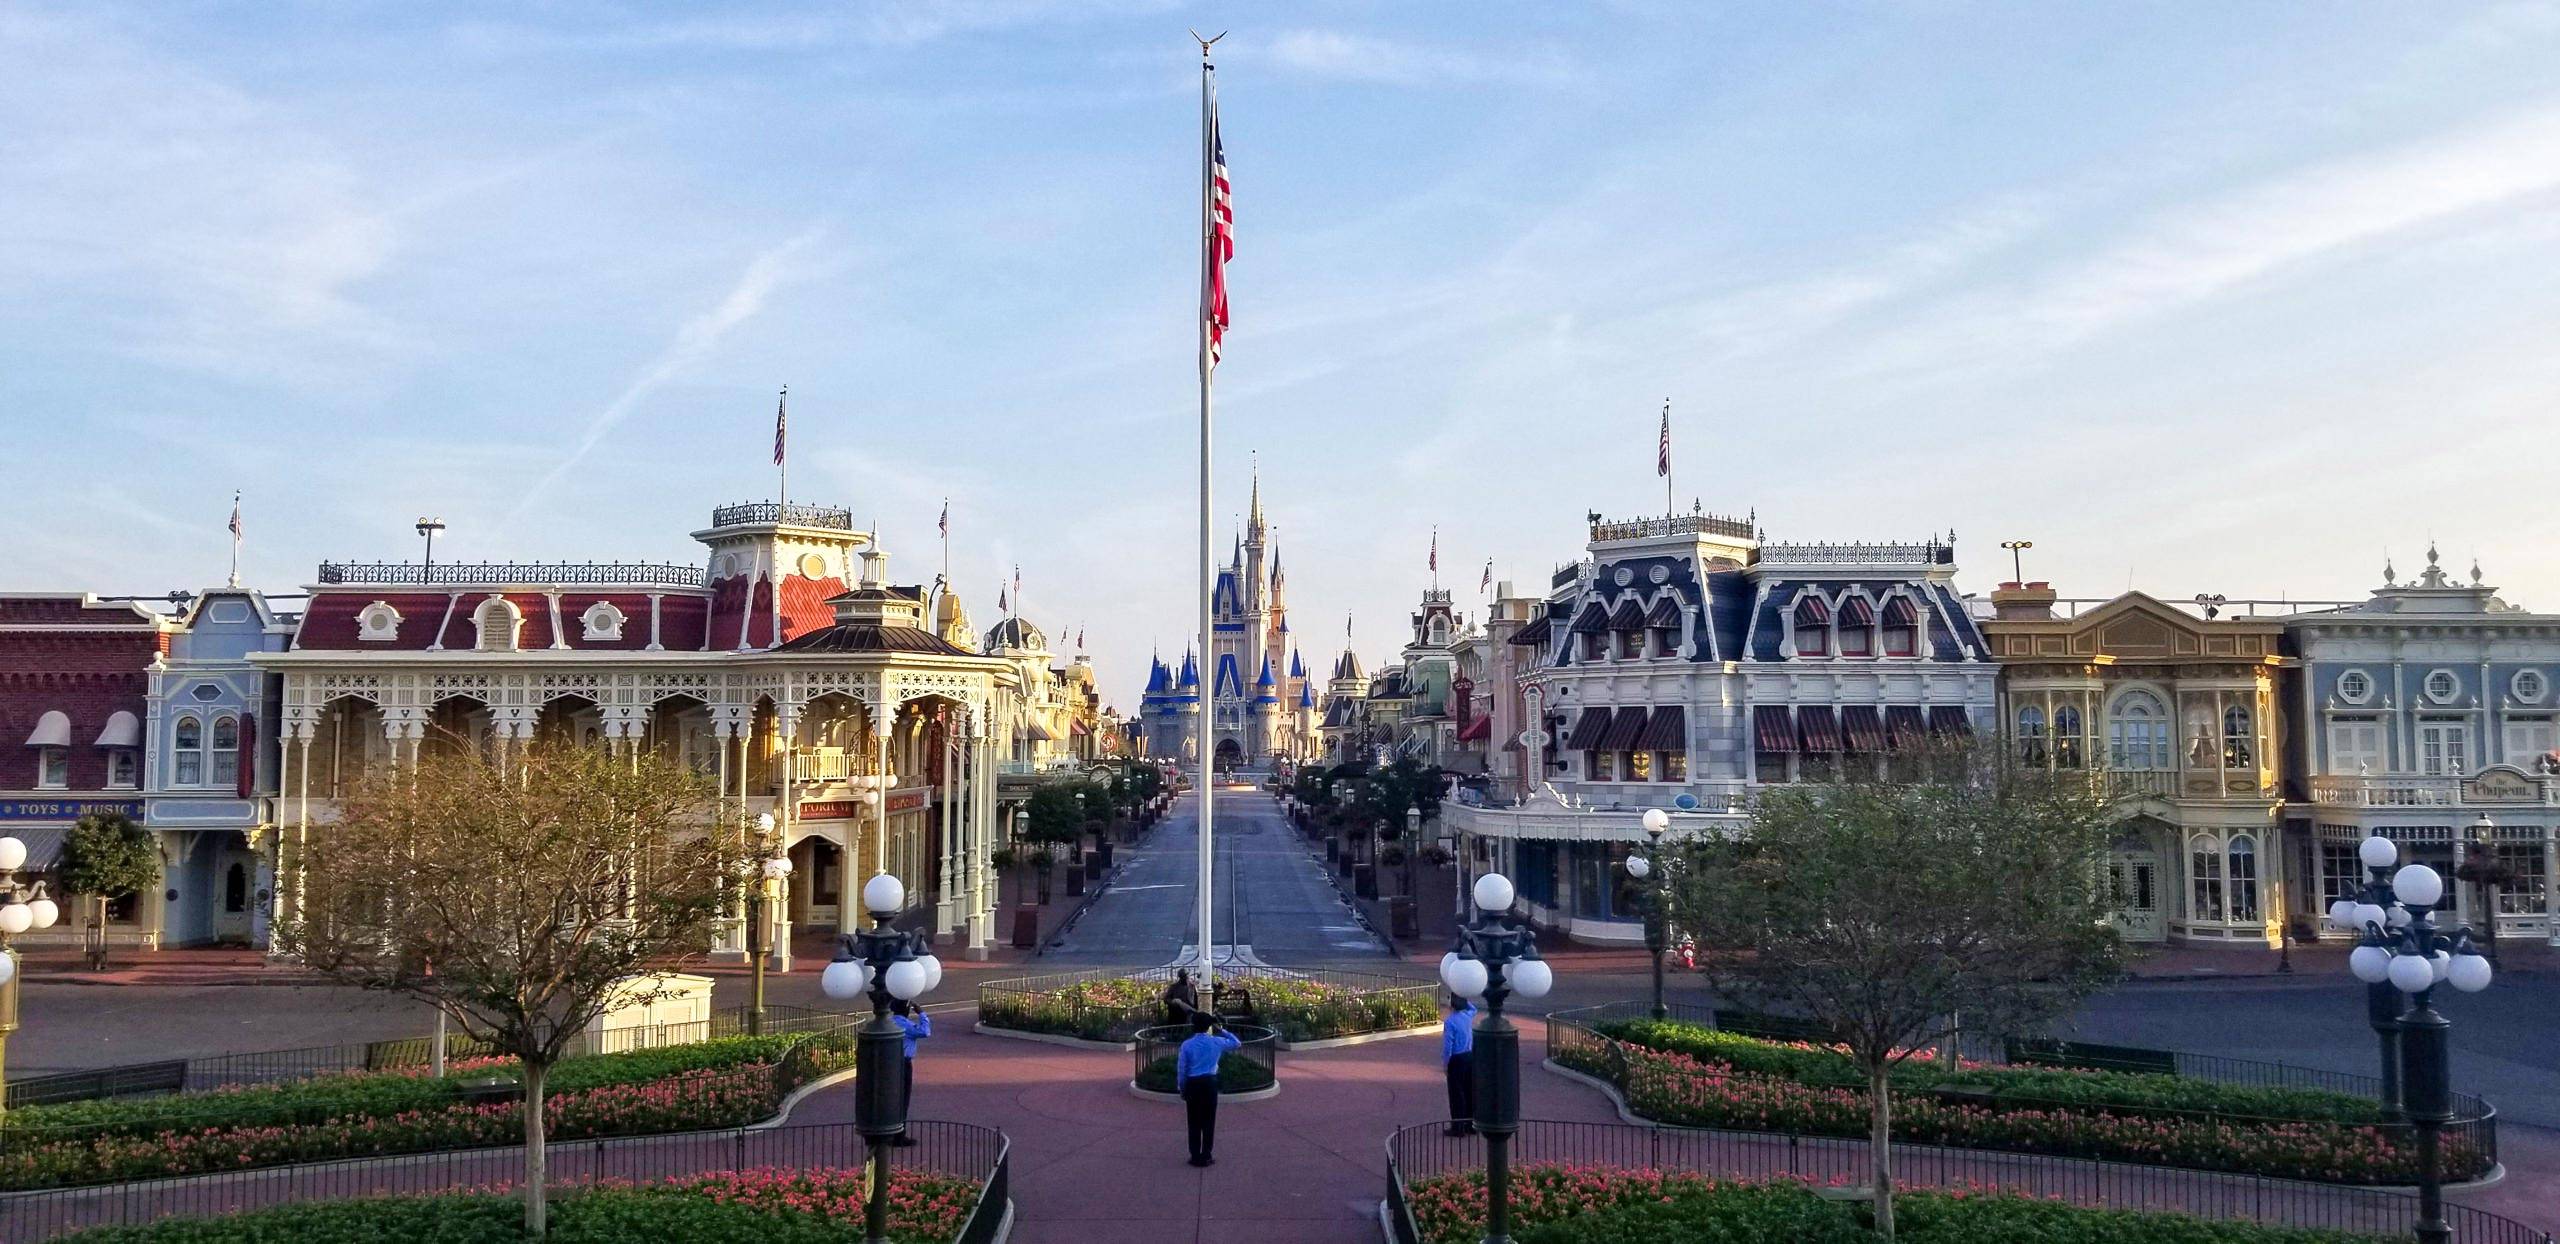 The Walt Disney World theme parks have been closed since March 16 until further notice.